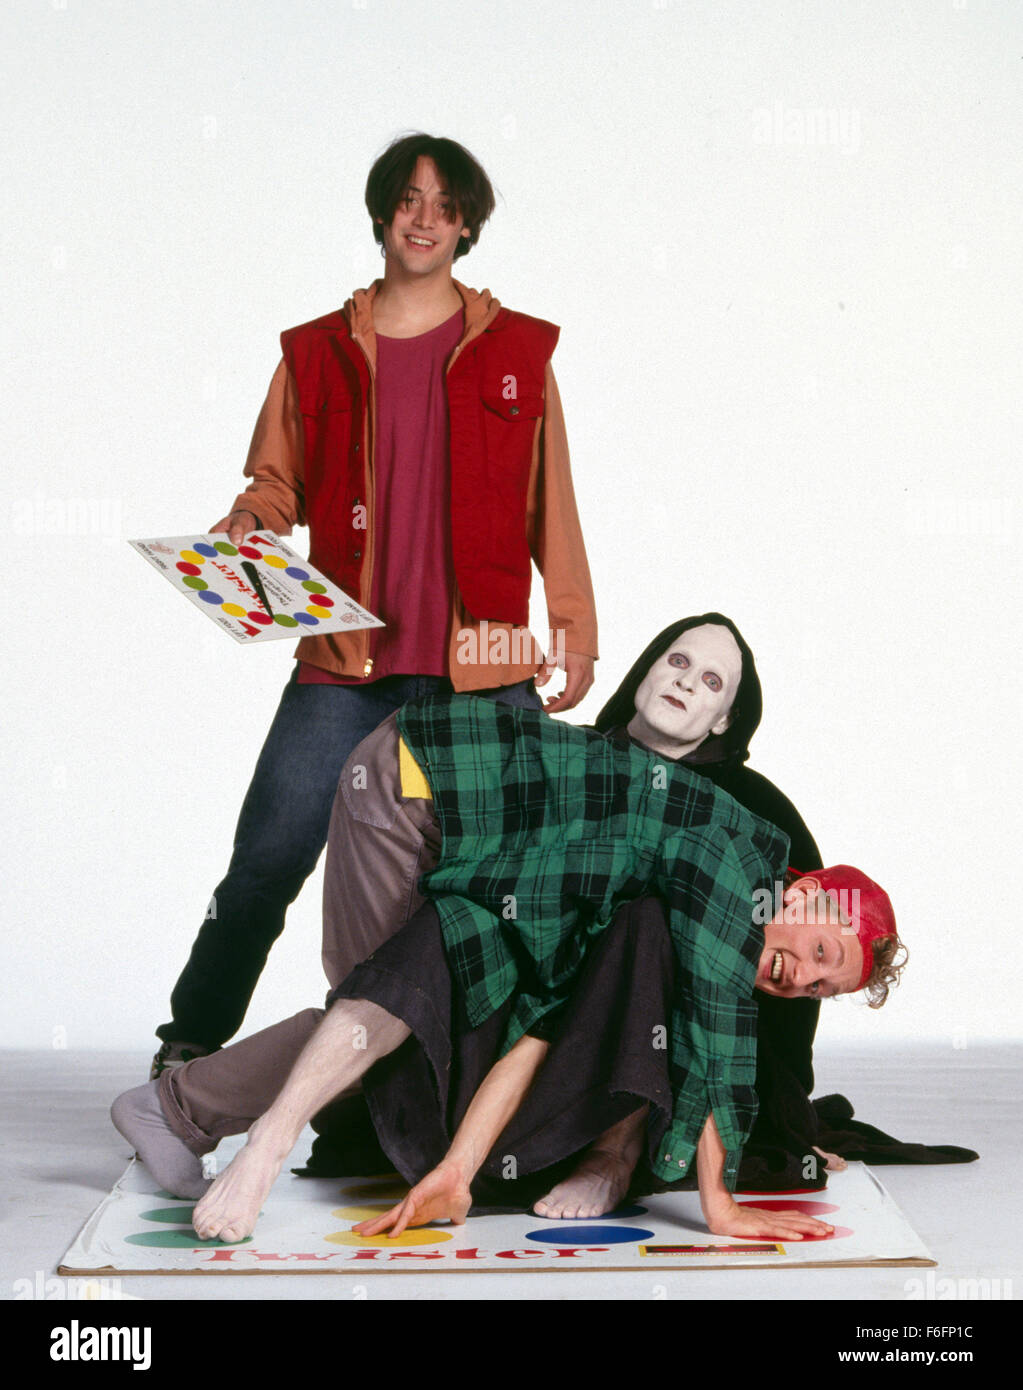 Jul 19, 1991; Los Angeles, CA, USA; (left to right) KEANU REEVES as Ted Logan, WILLIAM SADLER as Grim Reaper, and ALEX WINTERS as Bill S. Preston, Esq. in the adventure, sci-fi, comic film 'Bill and Ted's Bogus Journey' directed by Peter Hewitt. Stock Photo